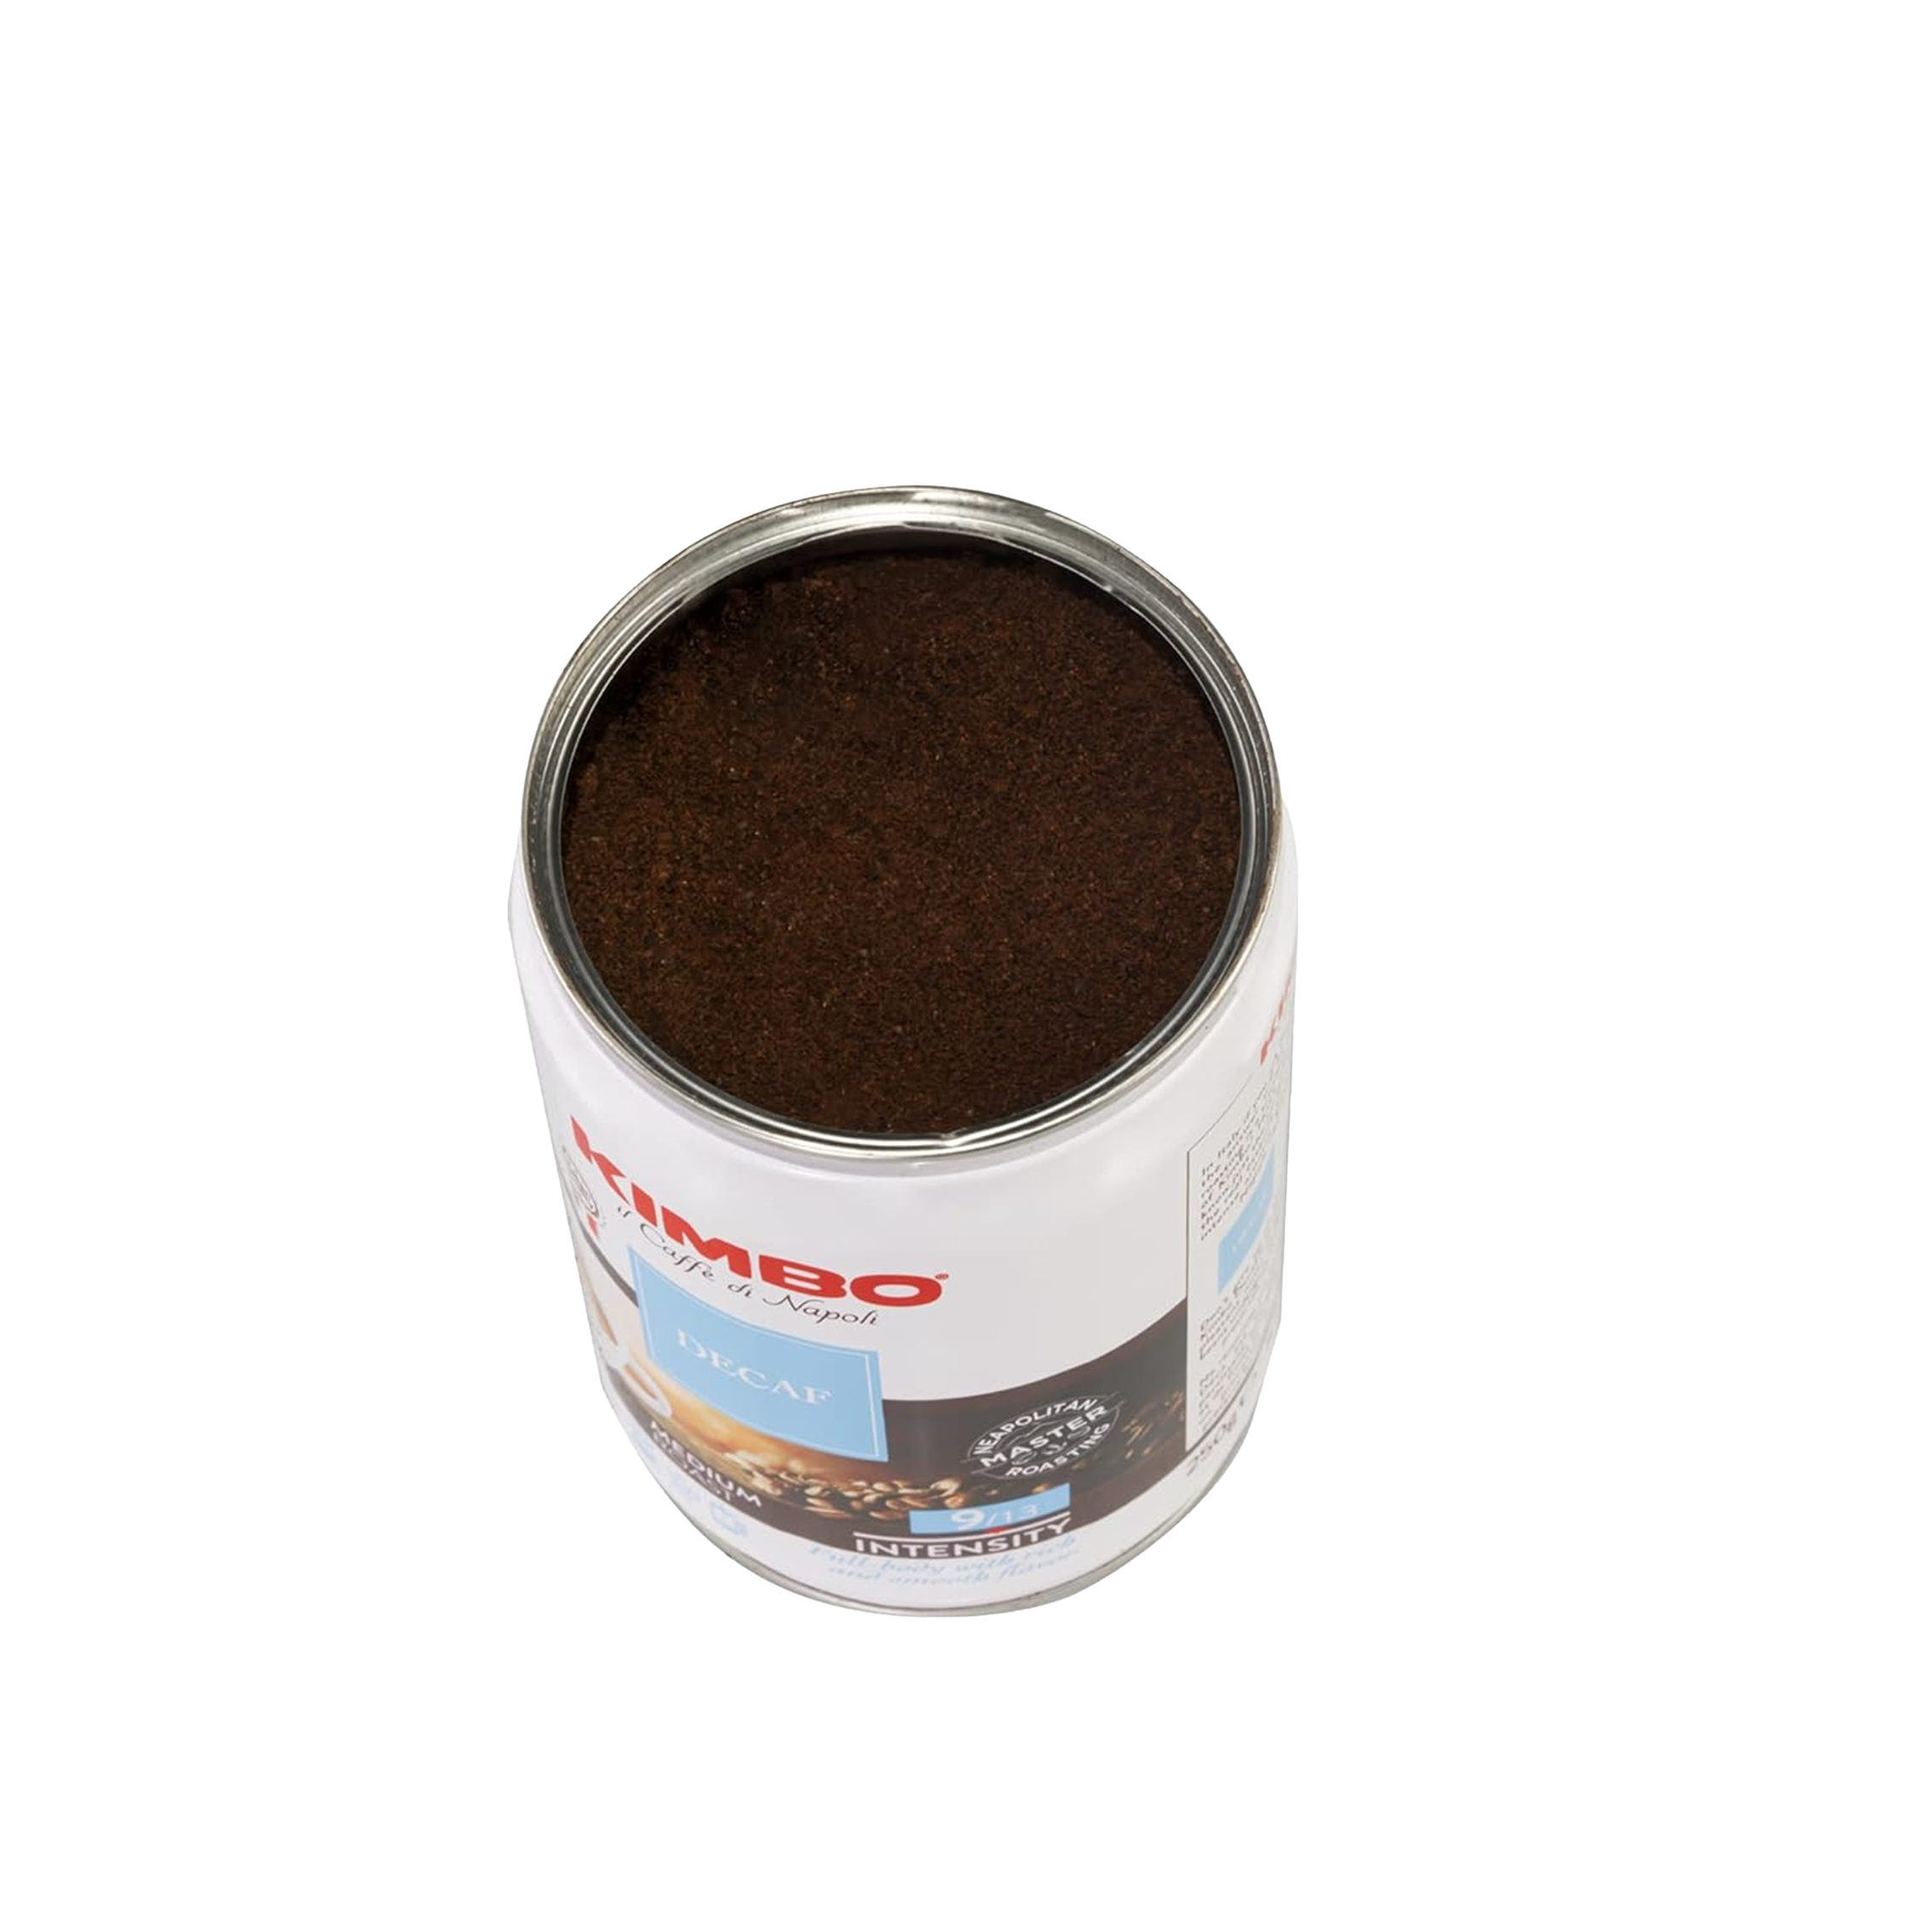 Decaf - Ground Can 8.8oz Can